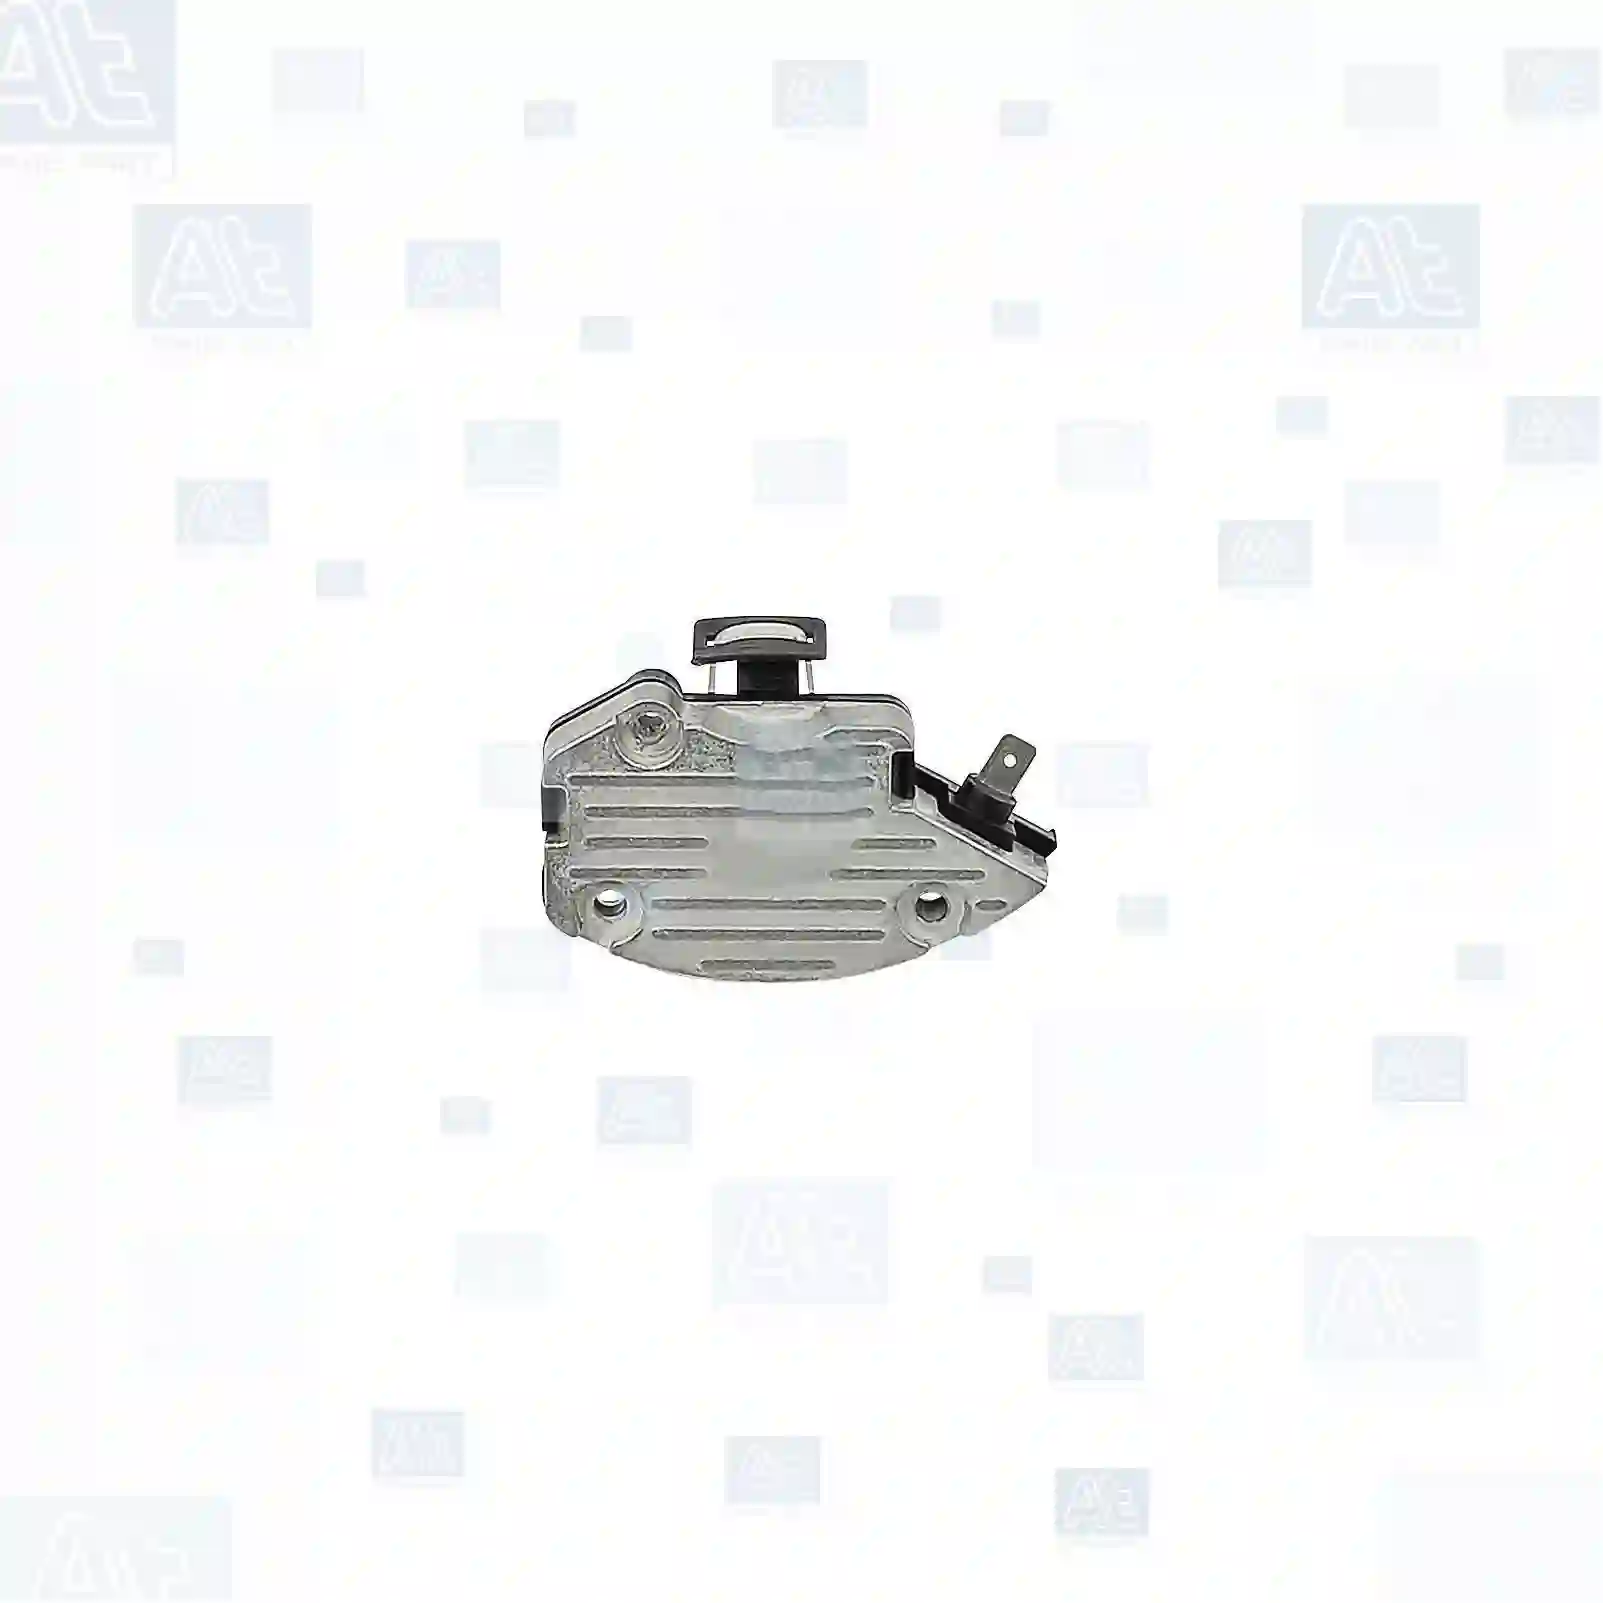 Regulator, at no 77710108, oem no: K262266, 1005351, 1406052, 1406068S, 1406091S, 1668894S, 5018320, 5027810S, 5027848S, 5029902S, 6133746, 6136958, 6565407, 7302659S, 84AB-10316-AA, 870X-10316-SA, 884FX-10K359-ABS, 914F-10300-AAS, 924F-10300-ABS, 924F-10K359-AAS, 924F-10K359-ABS, 924F-110300-AAS, 924F-X10K3-59S, 924FX-10K359-AAS, 924X1-0300-ABS, 94GB-10300-BBS, 94GB-10K359-ABS, 94GB-10K359-ACS, 94GB-10K359-AOS, 954F-10300-AAS, 954F-10K0300-AAS, 954F-10K0359-AAS, 954F-10K0359-ABS, 954F-10K300-AAS, 954F-10K359-AAS, 954F-10K359-ABS, D924F-10K359-ABS, R924F-10300-AAS, R924X-10300-AAS, R924X-10300-ABS, R954F-10300-AAS, R954F-10K359-AAS, 1865974M1, 1897699M91, 345773M91, 3474604M91, 3476714M91, 23100-71J00, 23100-71J10, 23133-71J00, 23133-Q9000, 28710252, 5430021883, BAU4919, BAU5265, BAU5815, BAU5958, FBU2243, FBV2243, RTC5044, RTC5370, RTC5670, ZG20771-0008 At Spare Part | Engine, Accelerator Pedal, Camshaft, Connecting Rod, Crankcase, Crankshaft, Cylinder Head, Engine Suspension Mountings, Exhaust Manifold, Exhaust Gas Recirculation, Filter Kits, Flywheel Housing, General Overhaul Kits, Engine, Intake Manifold, Oil Cleaner, Oil Cooler, Oil Filter, Oil Pump, Oil Sump, Piston & Liner, Sensor & Switch, Timing Case, Turbocharger, Cooling System, Belt Tensioner, Coolant Filter, Coolant Pipe, Corrosion Prevention Agent, Drive, Expansion Tank, Fan, Intercooler, Monitors & Gauges, Radiator, Thermostat, V-Belt / Timing belt, Water Pump, Fuel System, Electronical Injector Unit, Feed Pump, Fuel Filter, cpl., Fuel Gauge Sender,  Fuel Line, Fuel Pump, Fuel Tank, Injection Line Kit, Injection Pump, Exhaust System, Clutch & Pedal, Gearbox, Propeller Shaft, Axles, Brake System, Hubs & Wheels, Suspension, Leaf Spring, Universal Parts / Accessories, Steering, Electrical System, Cabin Regulator, at no 77710108, oem no: K262266, 1005351, 1406052, 1406068S, 1406091S, 1668894S, 5018320, 5027810S, 5027848S, 5029902S, 6133746, 6136958, 6565407, 7302659S, 84AB-10316-AA, 870X-10316-SA, 884FX-10K359-ABS, 914F-10300-AAS, 924F-10300-ABS, 924F-10K359-AAS, 924F-10K359-ABS, 924F-110300-AAS, 924F-X10K3-59S, 924FX-10K359-AAS, 924X1-0300-ABS, 94GB-10300-BBS, 94GB-10K359-ABS, 94GB-10K359-ACS, 94GB-10K359-AOS, 954F-10300-AAS, 954F-10K0300-AAS, 954F-10K0359-AAS, 954F-10K0359-ABS, 954F-10K300-AAS, 954F-10K359-AAS, 954F-10K359-ABS, D924F-10K359-ABS, R924F-10300-AAS, R924X-10300-AAS, R924X-10300-ABS, R954F-10300-AAS, R954F-10K359-AAS, 1865974M1, 1897699M91, 345773M91, 3474604M91, 3476714M91, 23100-71J00, 23100-71J10, 23133-71J00, 23133-Q9000, 28710252, 5430021883, BAU4919, BAU5265, BAU5815, BAU5958, FBU2243, FBV2243, RTC5044, RTC5370, RTC5670, ZG20771-0008 At Spare Part | Engine, Accelerator Pedal, Camshaft, Connecting Rod, Crankcase, Crankshaft, Cylinder Head, Engine Suspension Mountings, Exhaust Manifold, Exhaust Gas Recirculation, Filter Kits, Flywheel Housing, General Overhaul Kits, Engine, Intake Manifold, Oil Cleaner, Oil Cooler, Oil Filter, Oil Pump, Oil Sump, Piston & Liner, Sensor & Switch, Timing Case, Turbocharger, Cooling System, Belt Tensioner, Coolant Filter, Coolant Pipe, Corrosion Prevention Agent, Drive, Expansion Tank, Fan, Intercooler, Monitors & Gauges, Radiator, Thermostat, V-Belt / Timing belt, Water Pump, Fuel System, Electronical Injector Unit, Feed Pump, Fuel Filter, cpl., Fuel Gauge Sender,  Fuel Line, Fuel Pump, Fuel Tank, Injection Line Kit, Injection Pump, Exhaust System, Clutch & Pedal, Gearbox, Propeller Shaft, Axles, Brake System, Hubs & Wheels, Suspension, Leaf Spring, Universal Parts / Accessories, Steering, Electrical System, Cabin